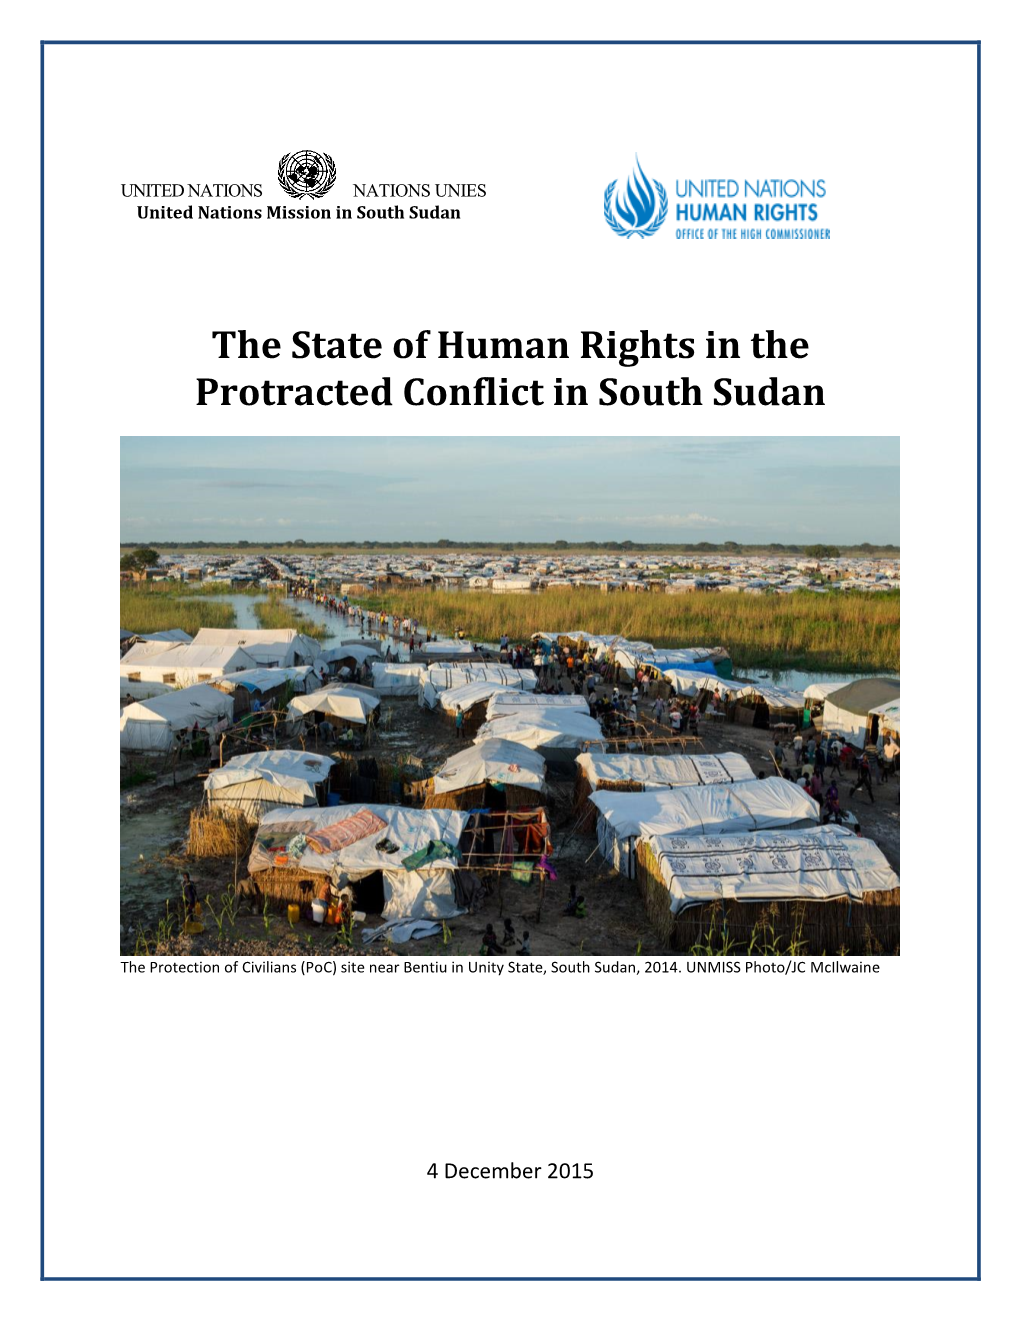 The State of Human Rights in the Protracted Conflict in South Sudan